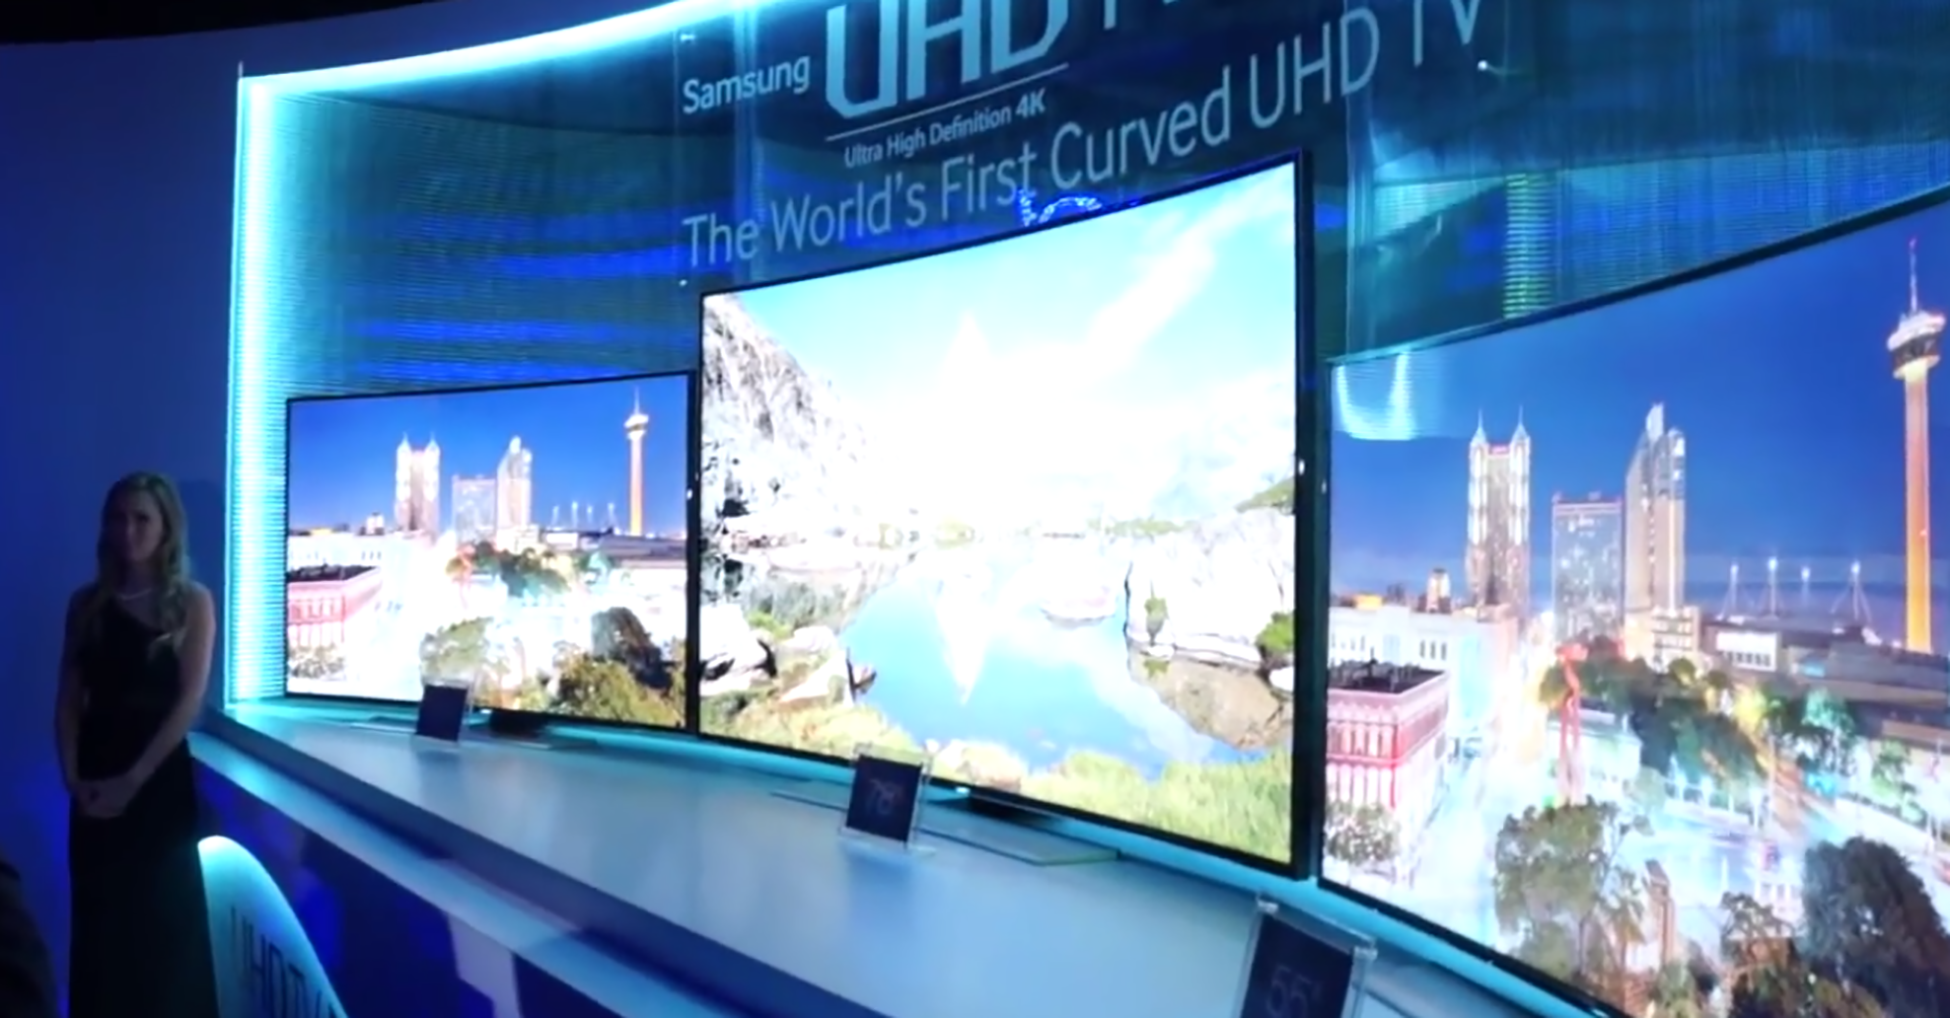 A photograph shows a large television with a concave screen. Above the television display is a sign that reads, Samsung U H D, the world's first curved U H D T V.